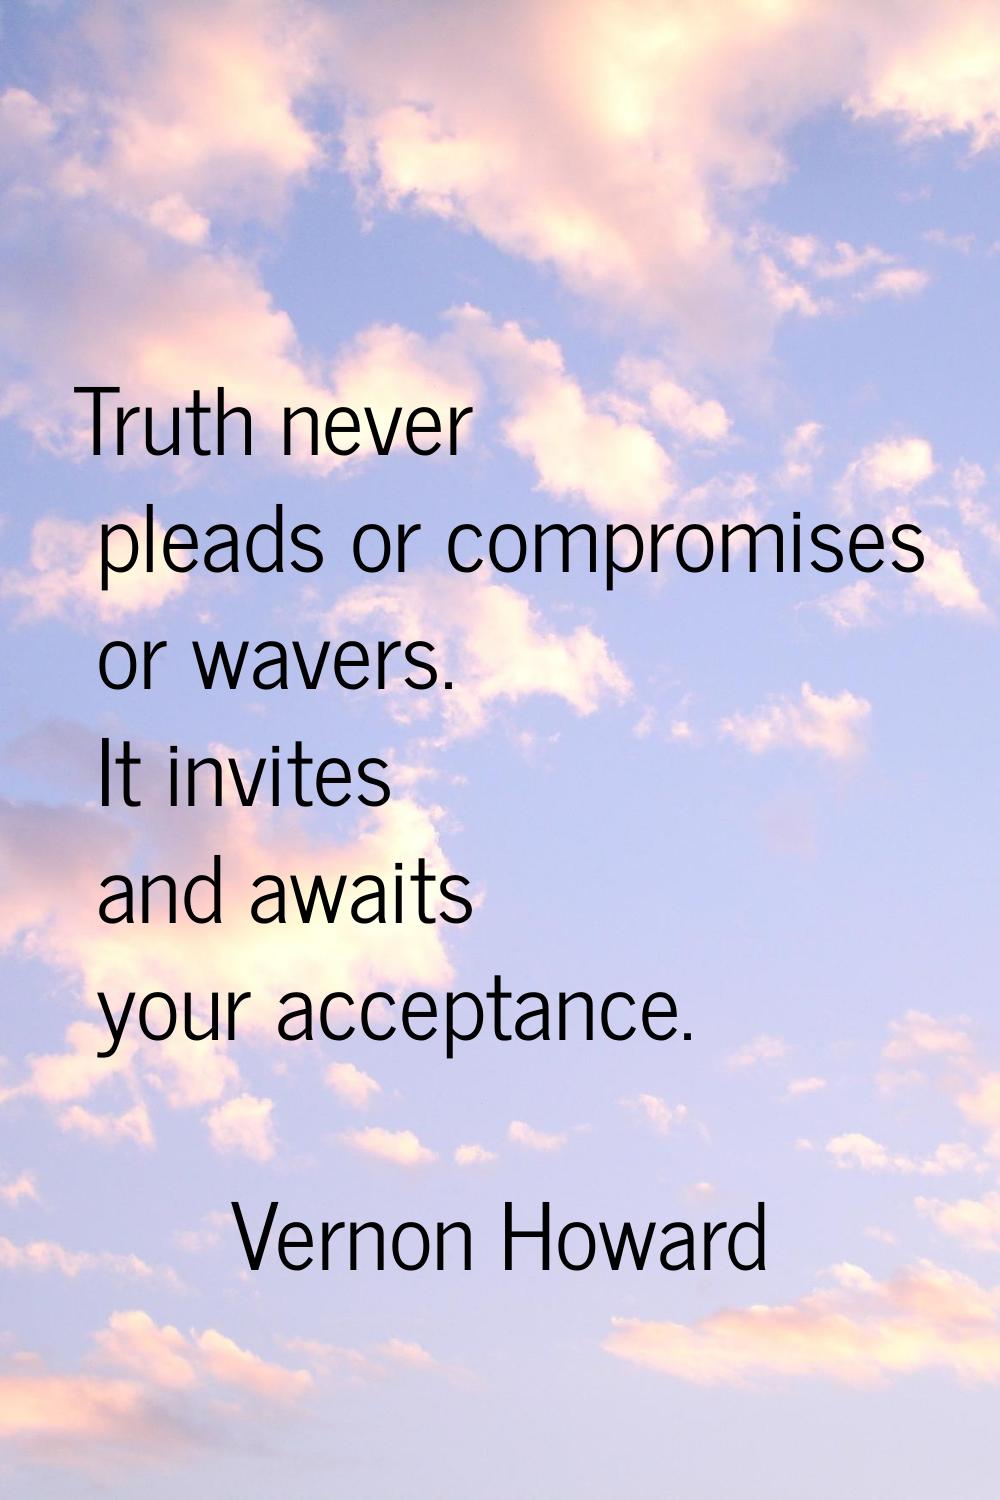 Truth never pleads or compromises or wavers. It invites and awaits your acceptance.